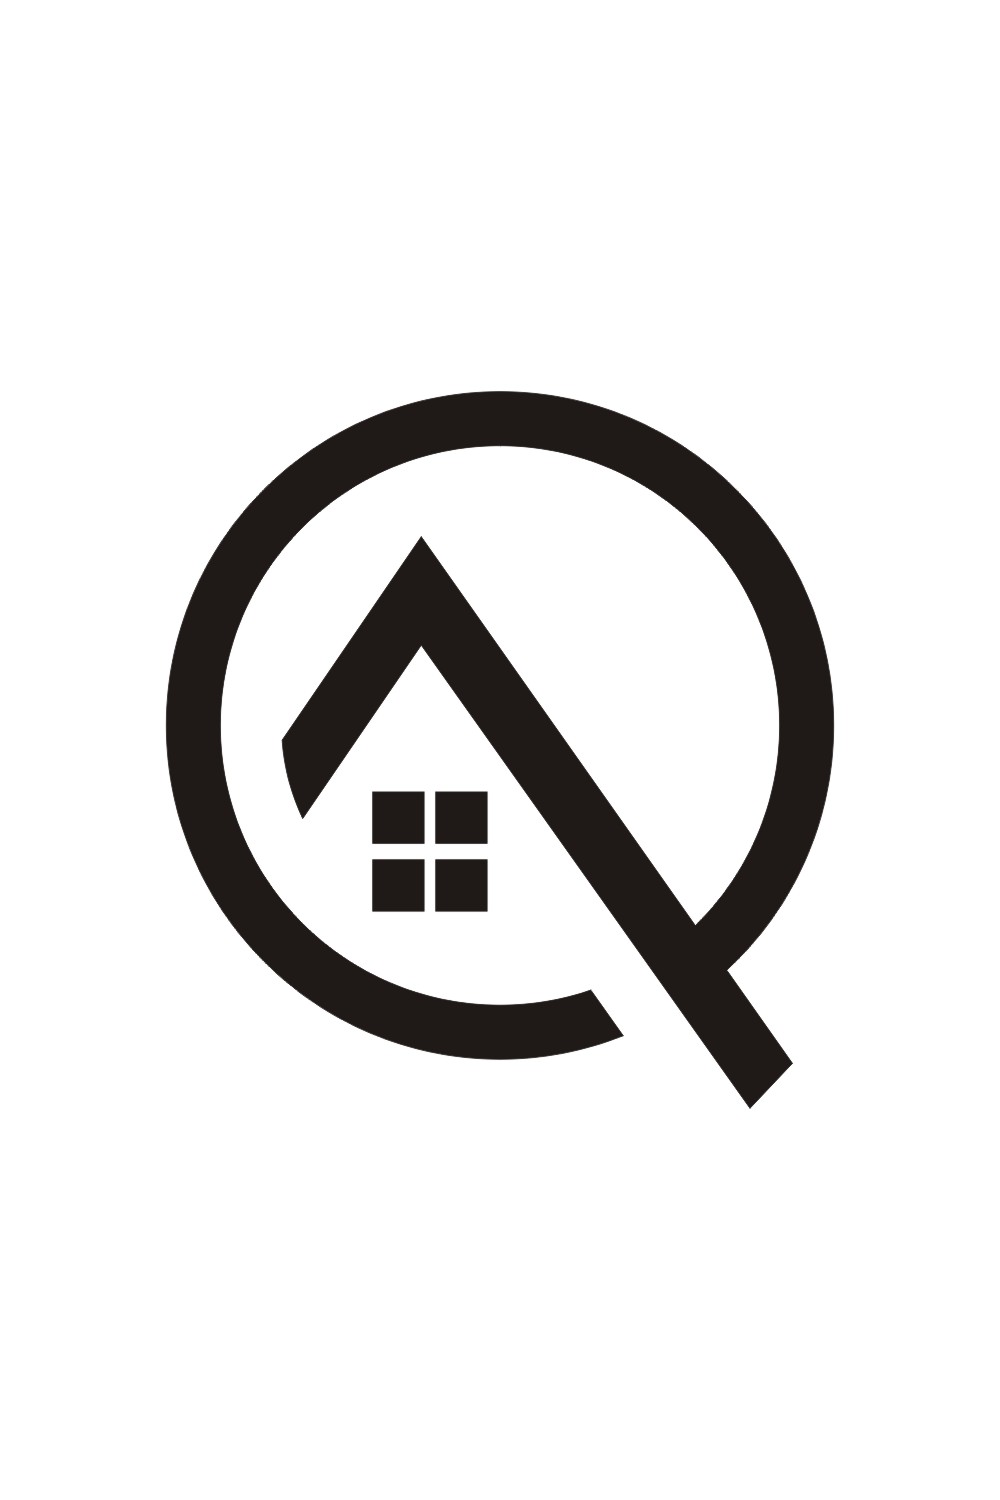 Home property logo pinterest preview image.